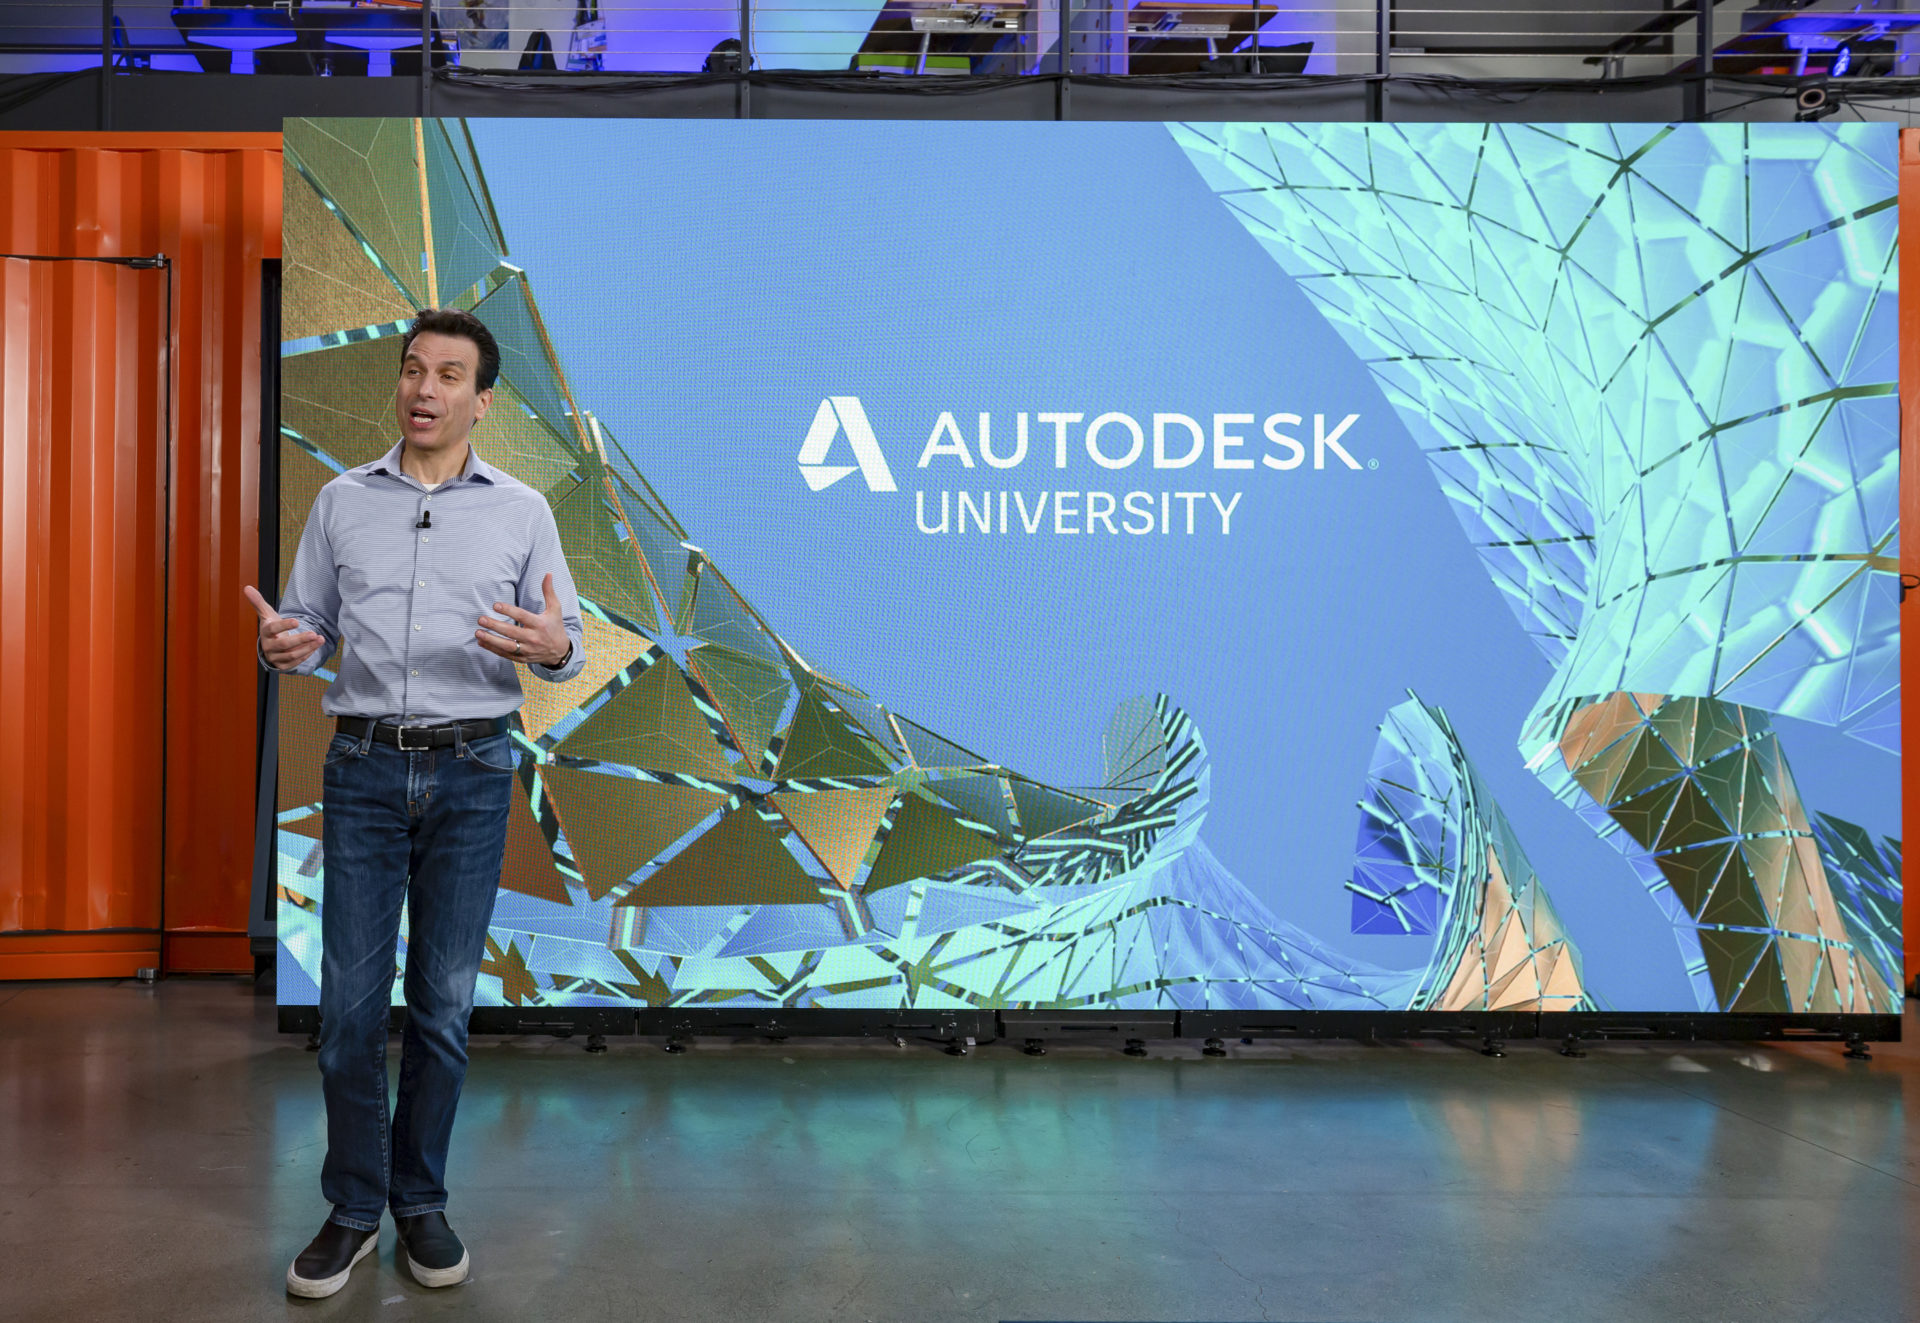 Andrew Anagnost, Autodesk President, presents at the General Session keynote for Autodesk University 2020.